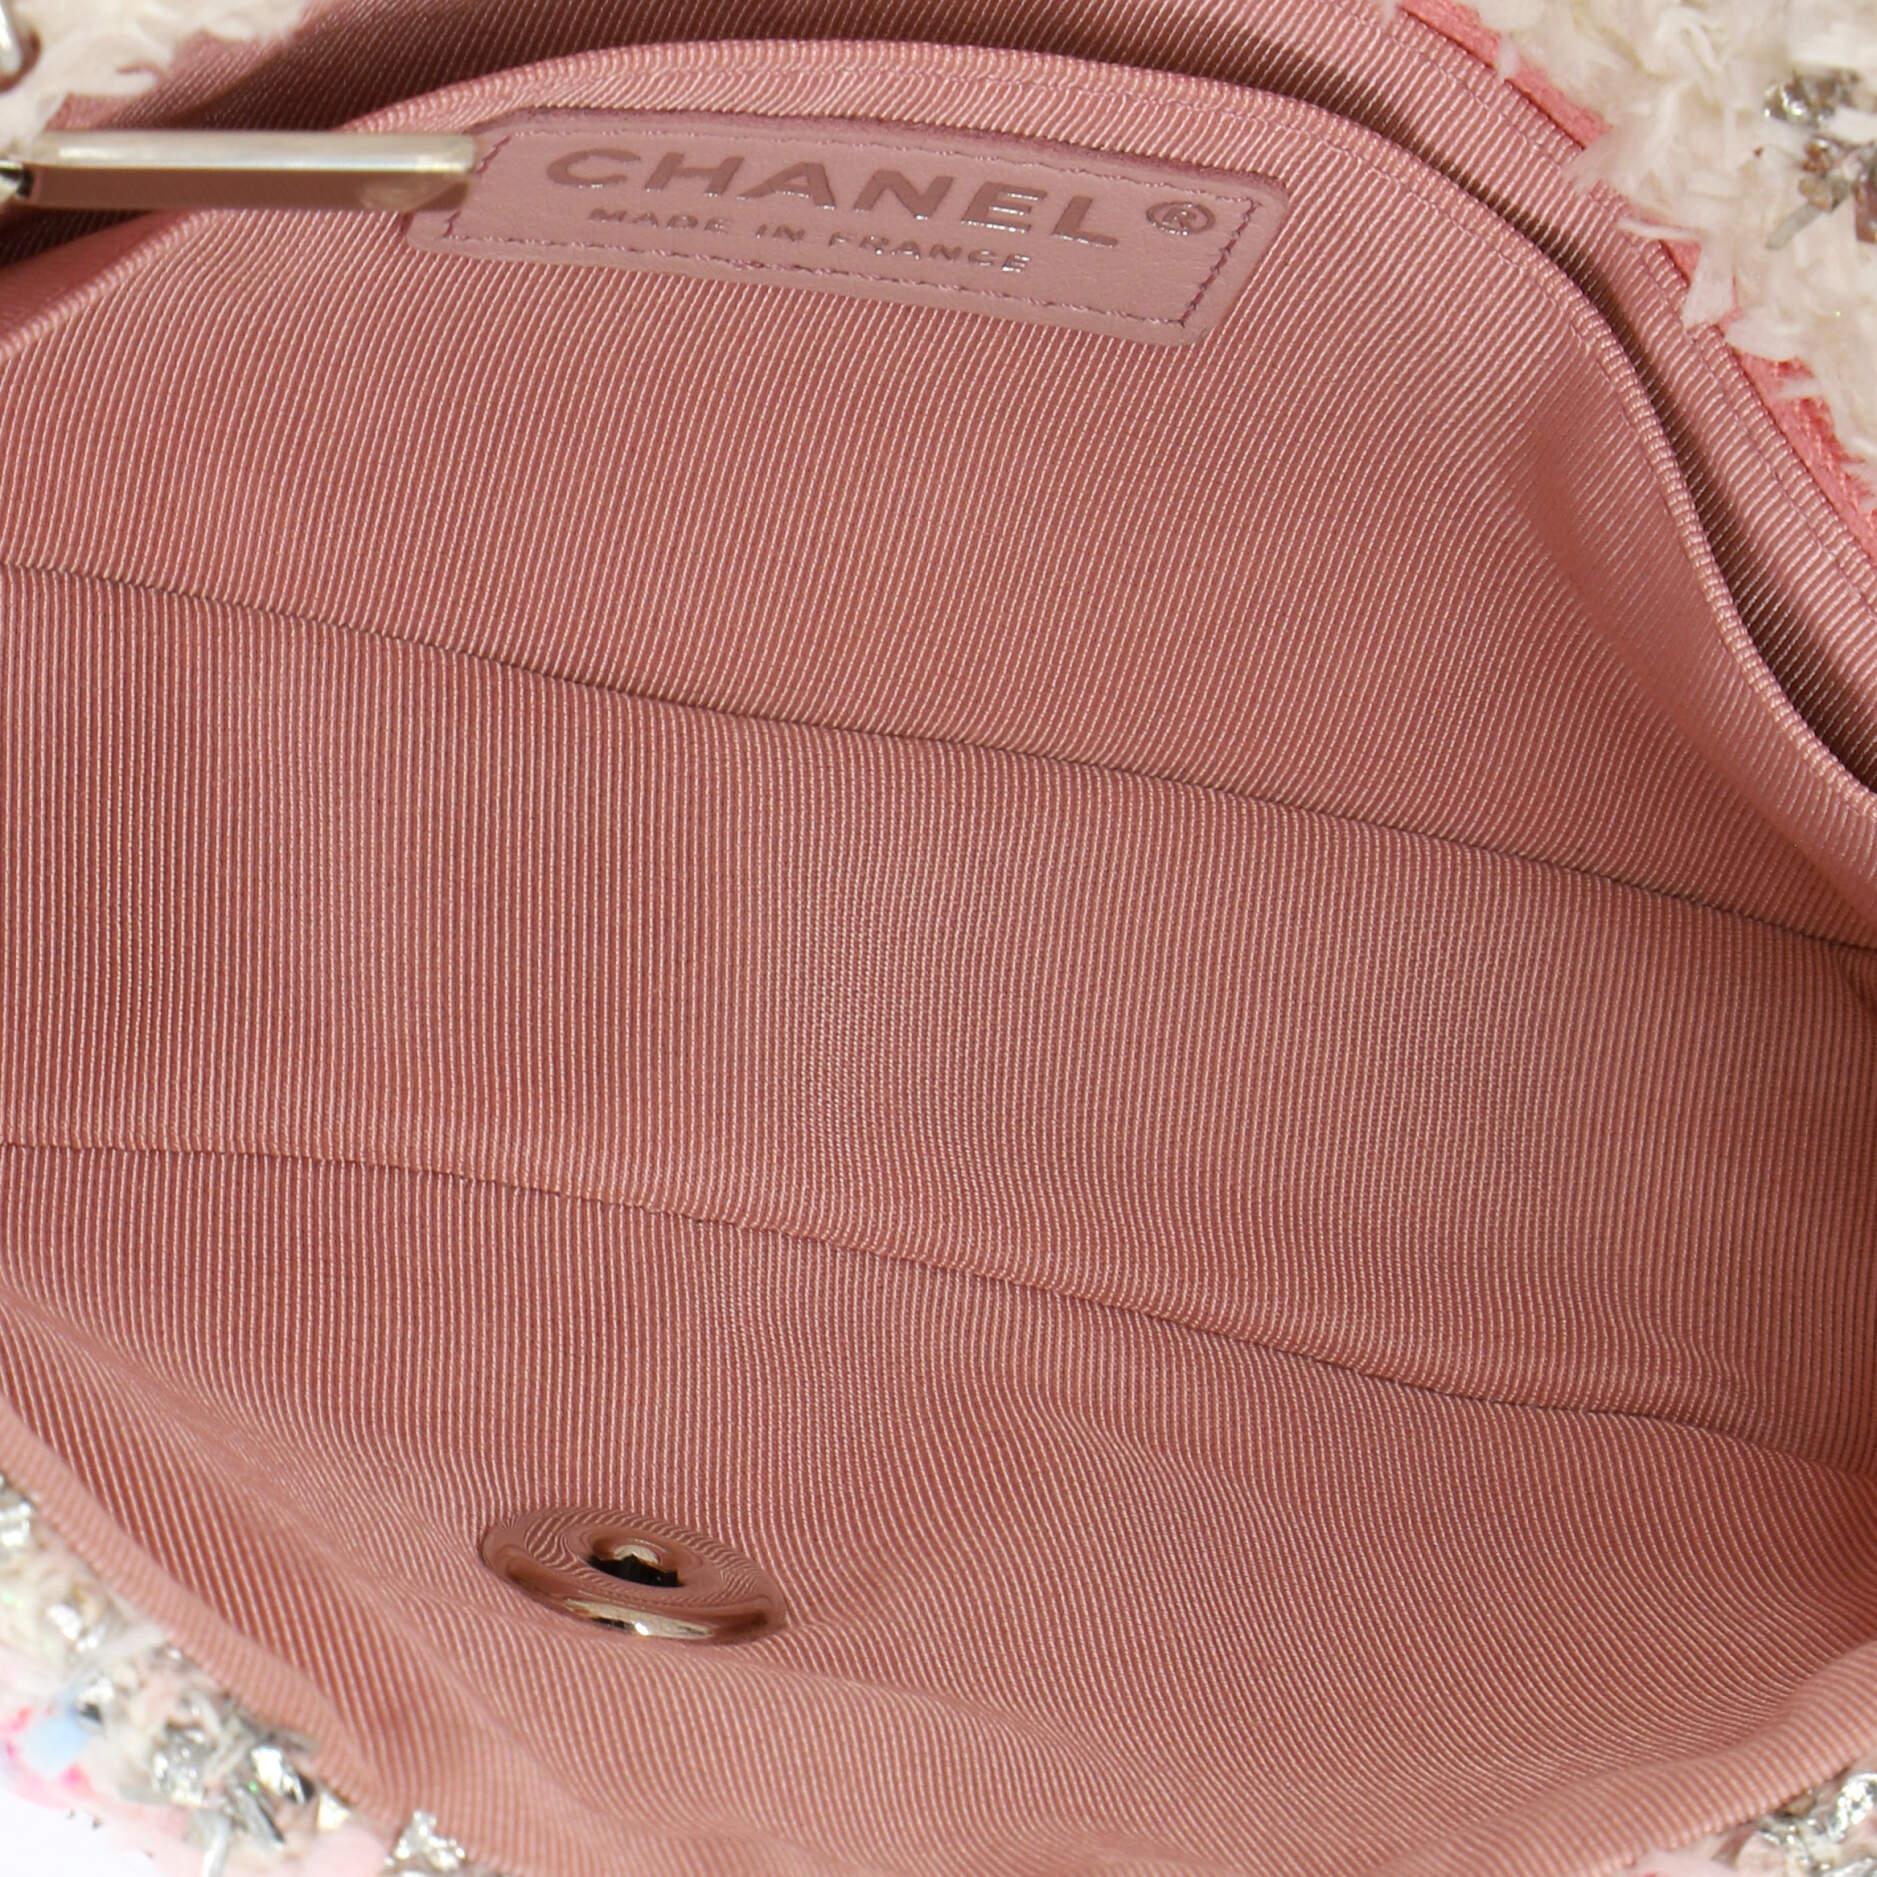 Chanel Classic Single Flap Bag Quilted Tweed and Ribbon Mini 2